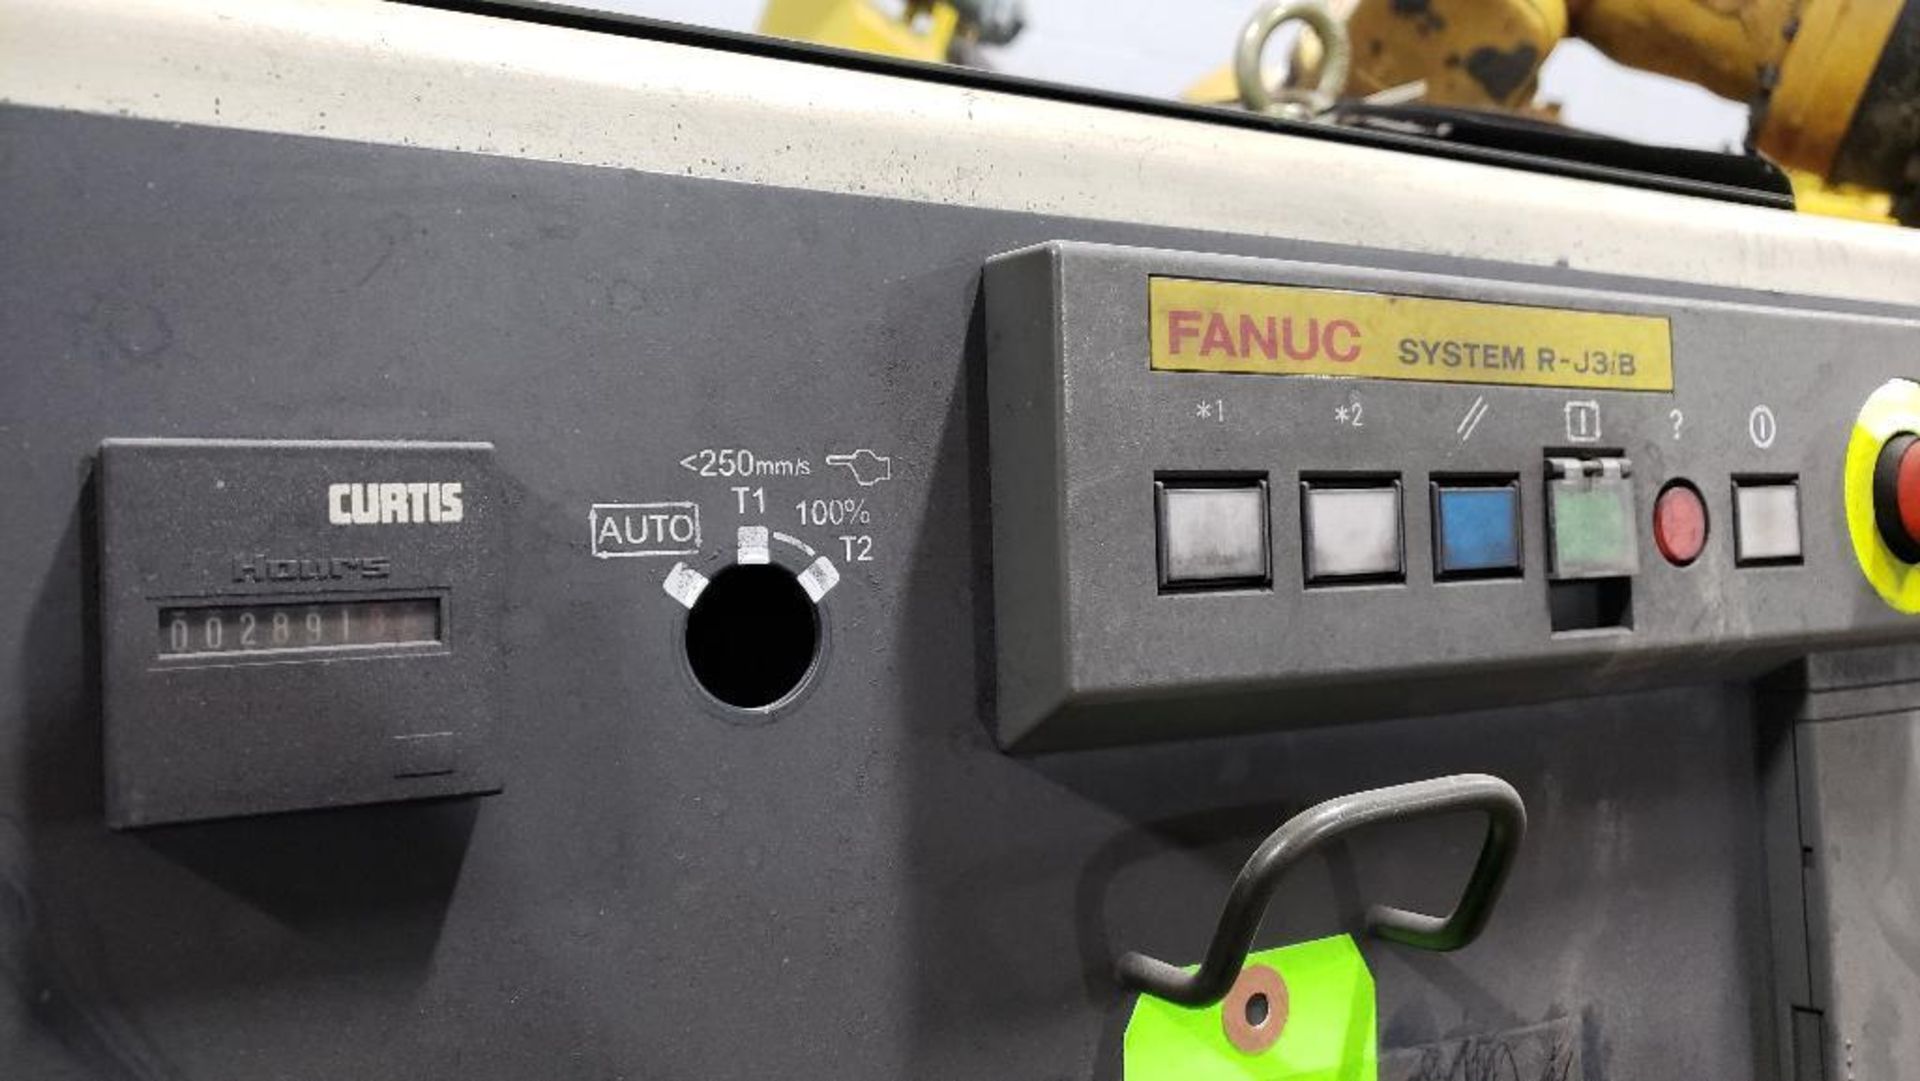 Fanuc R-2000iA/200F robot with Fanuc System R-J3iB controller. - Image 9 of 14